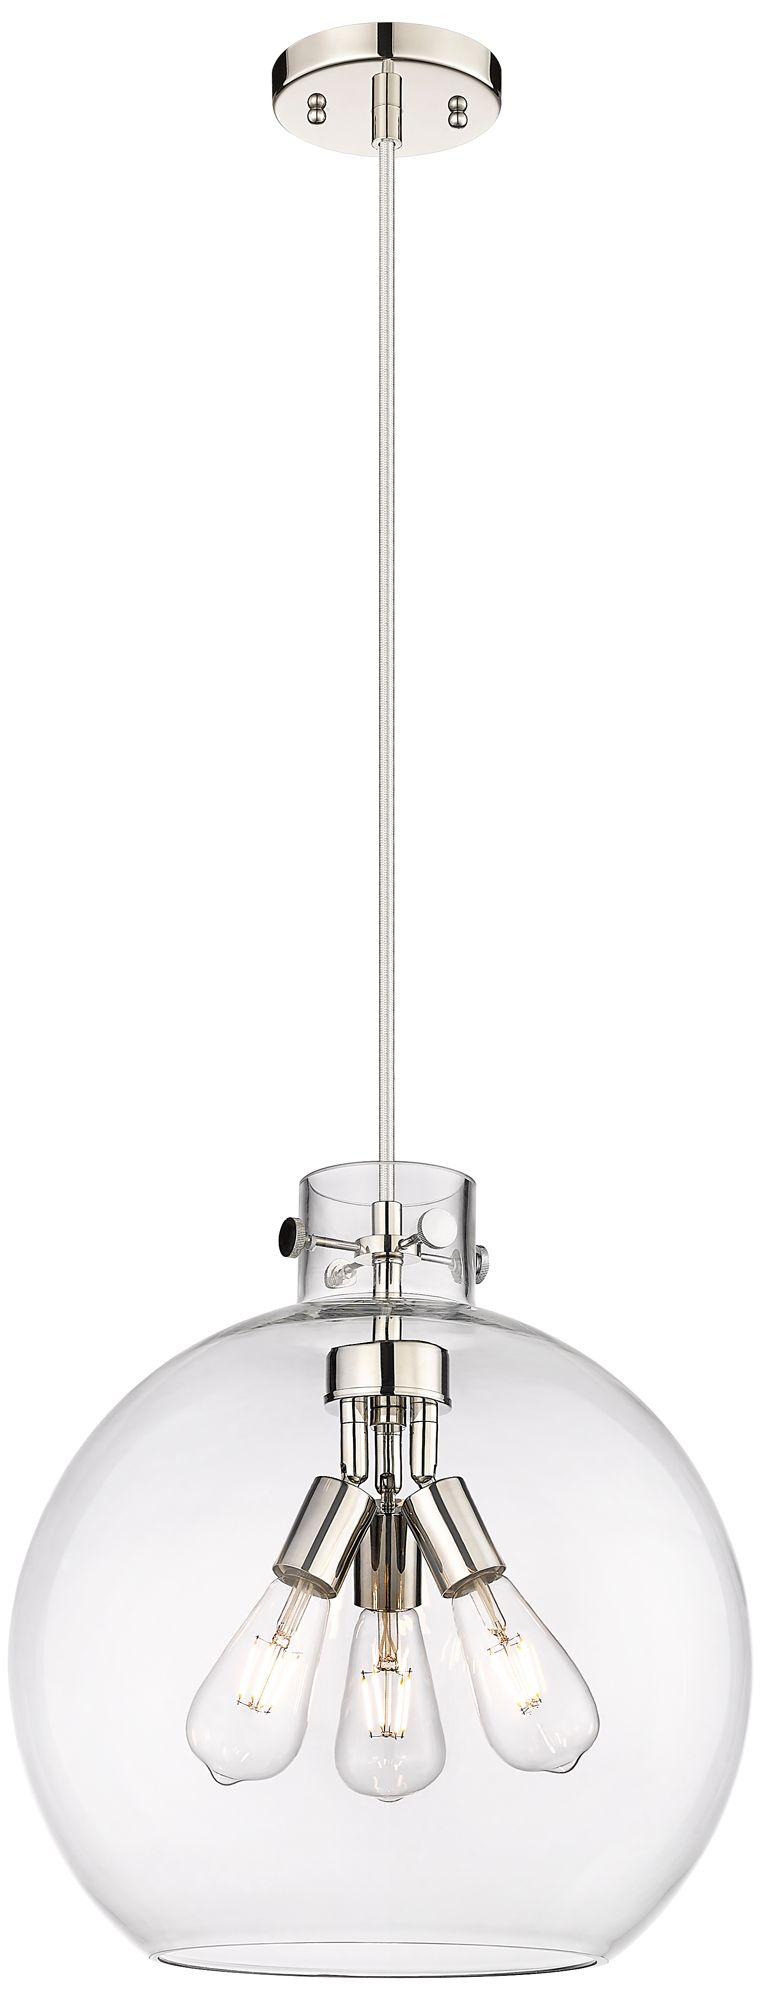 Newton Sphere 16"W 3 Light Cord Hung Polished Nickel Pendant w/ Clear